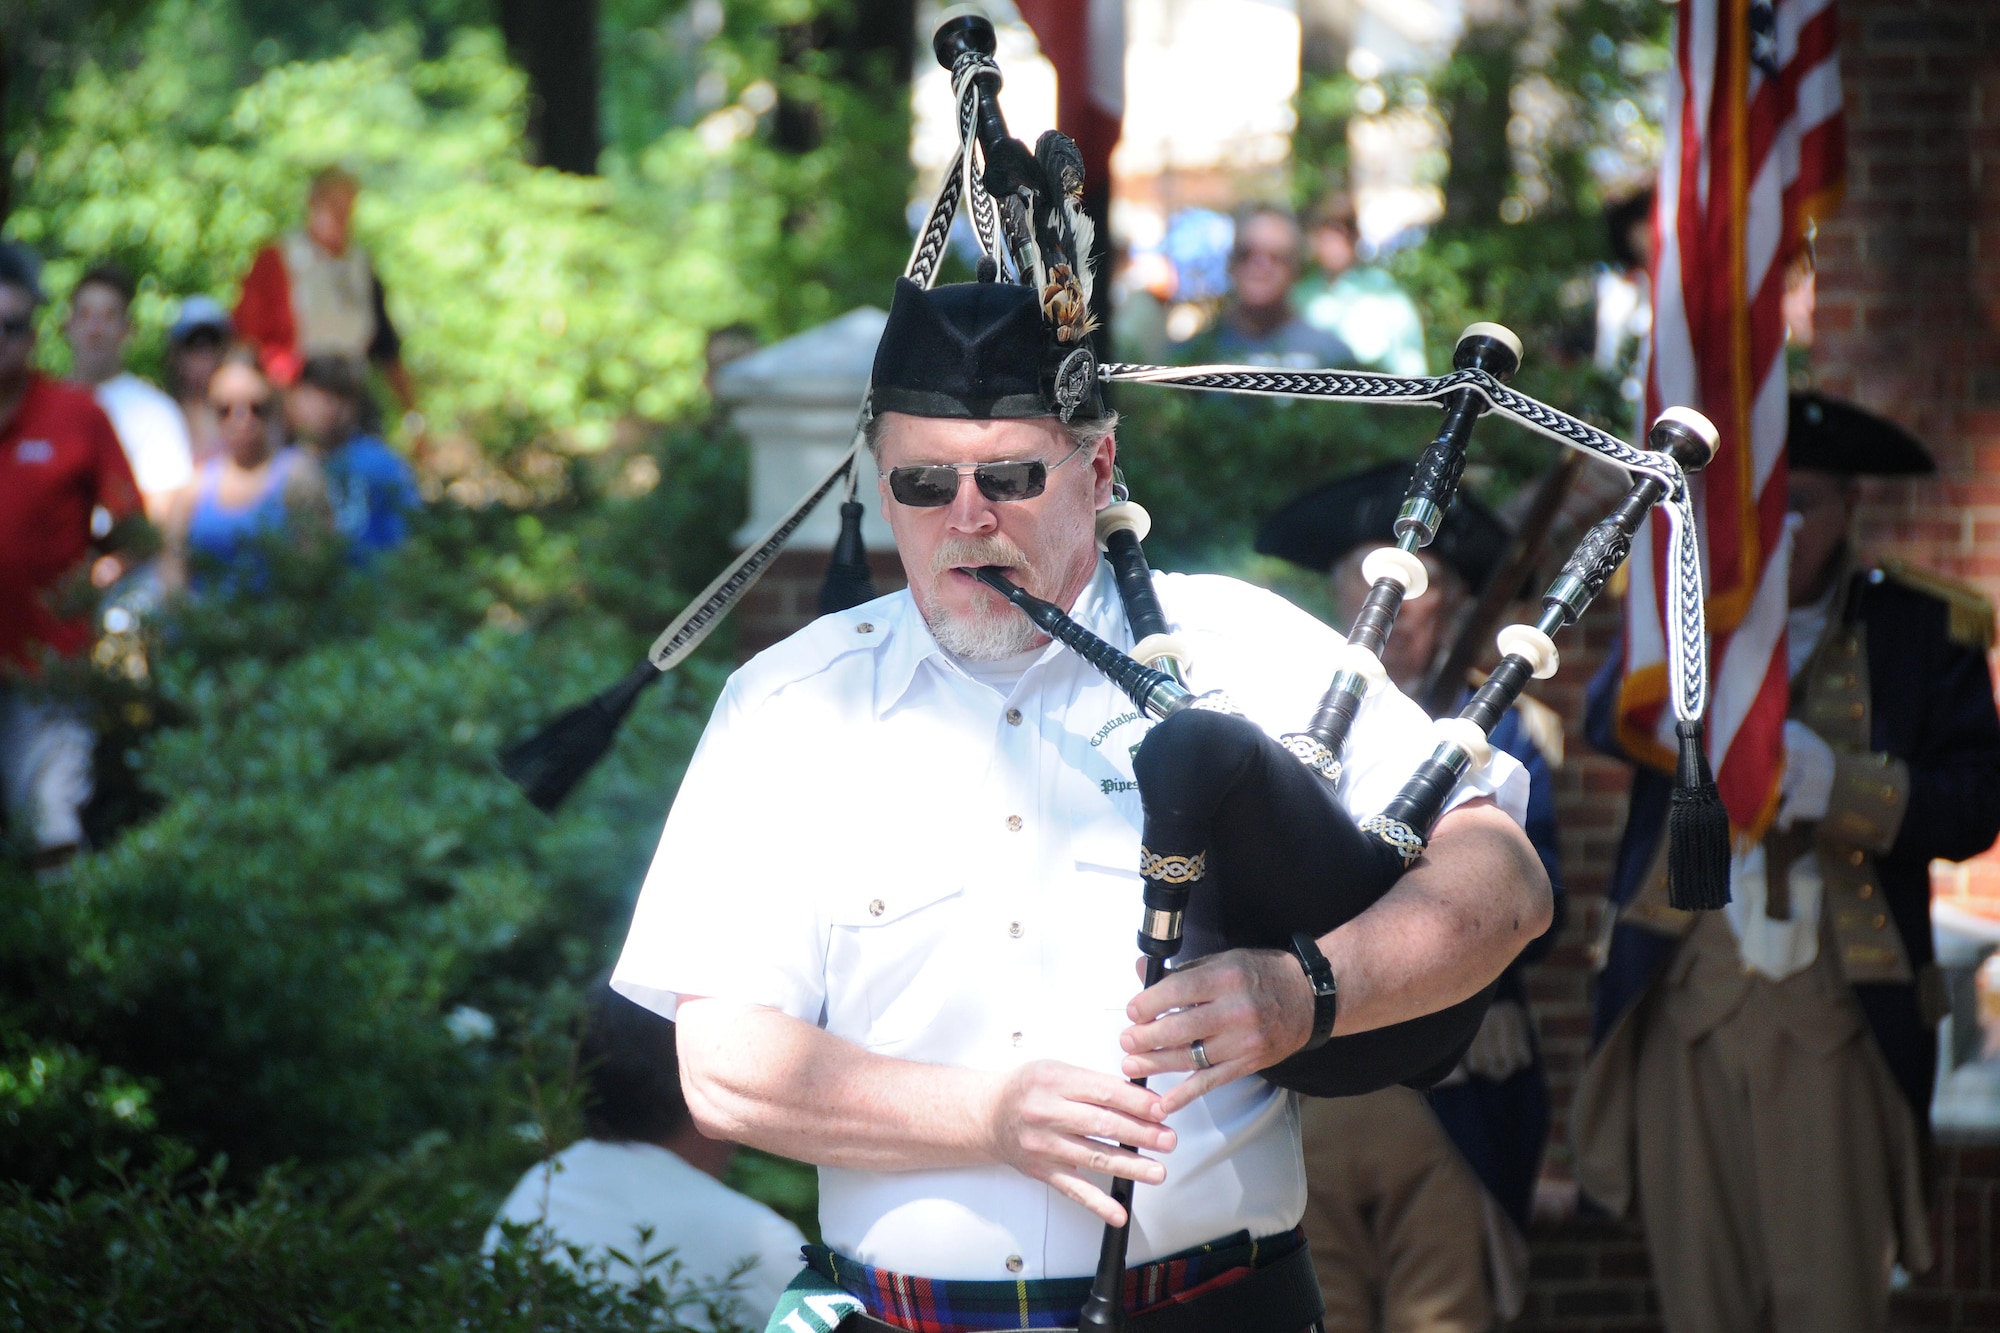 A bagpiper plays during the start of the Roswell Memorial Day Ceremony at Roswell City Hall area, Roswell, GA on May 27, 2019. At the event, all branches of the military were represented and individual service representatives from each branch participated in the mixed service recognition portion of the program. (U.S. Air Force photo by Senior Airman Justin Clayvon).